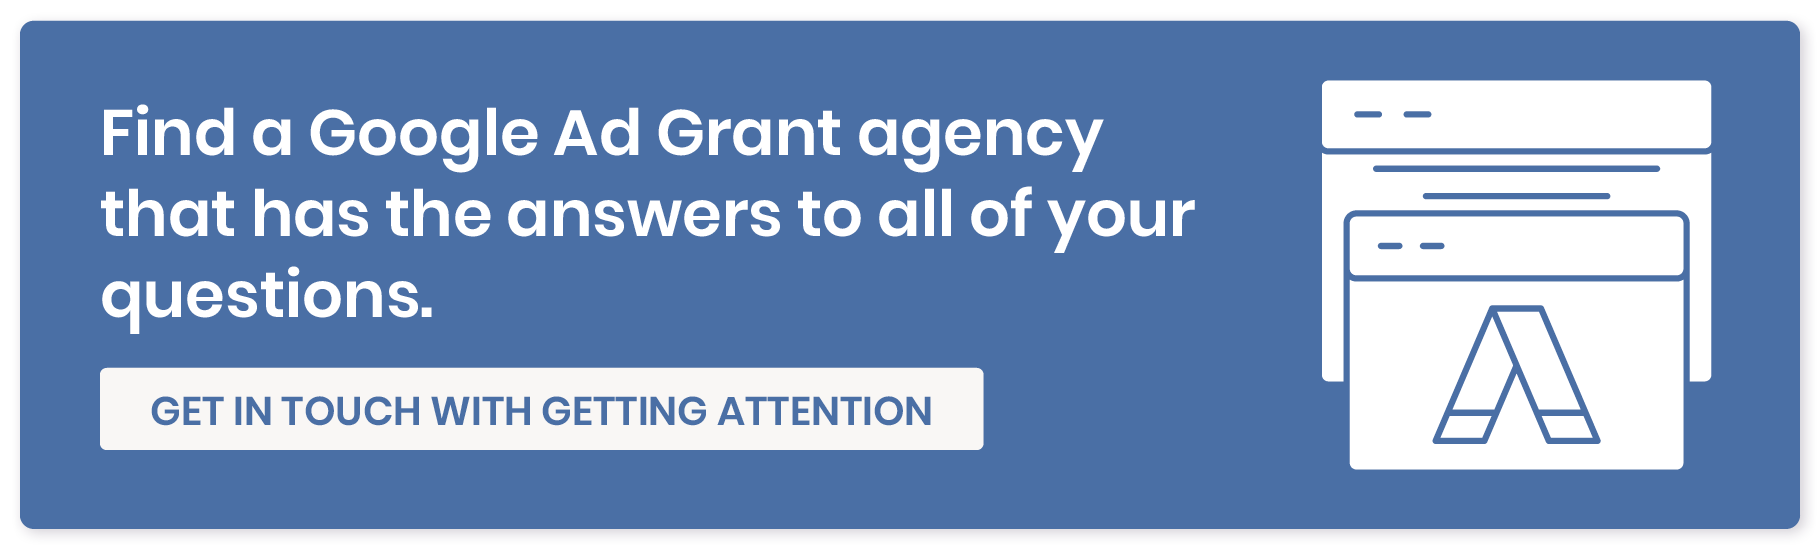 Find a Google Ad Grant agency that has the answers to all of your questions. Get in touch with Getting Attention. 